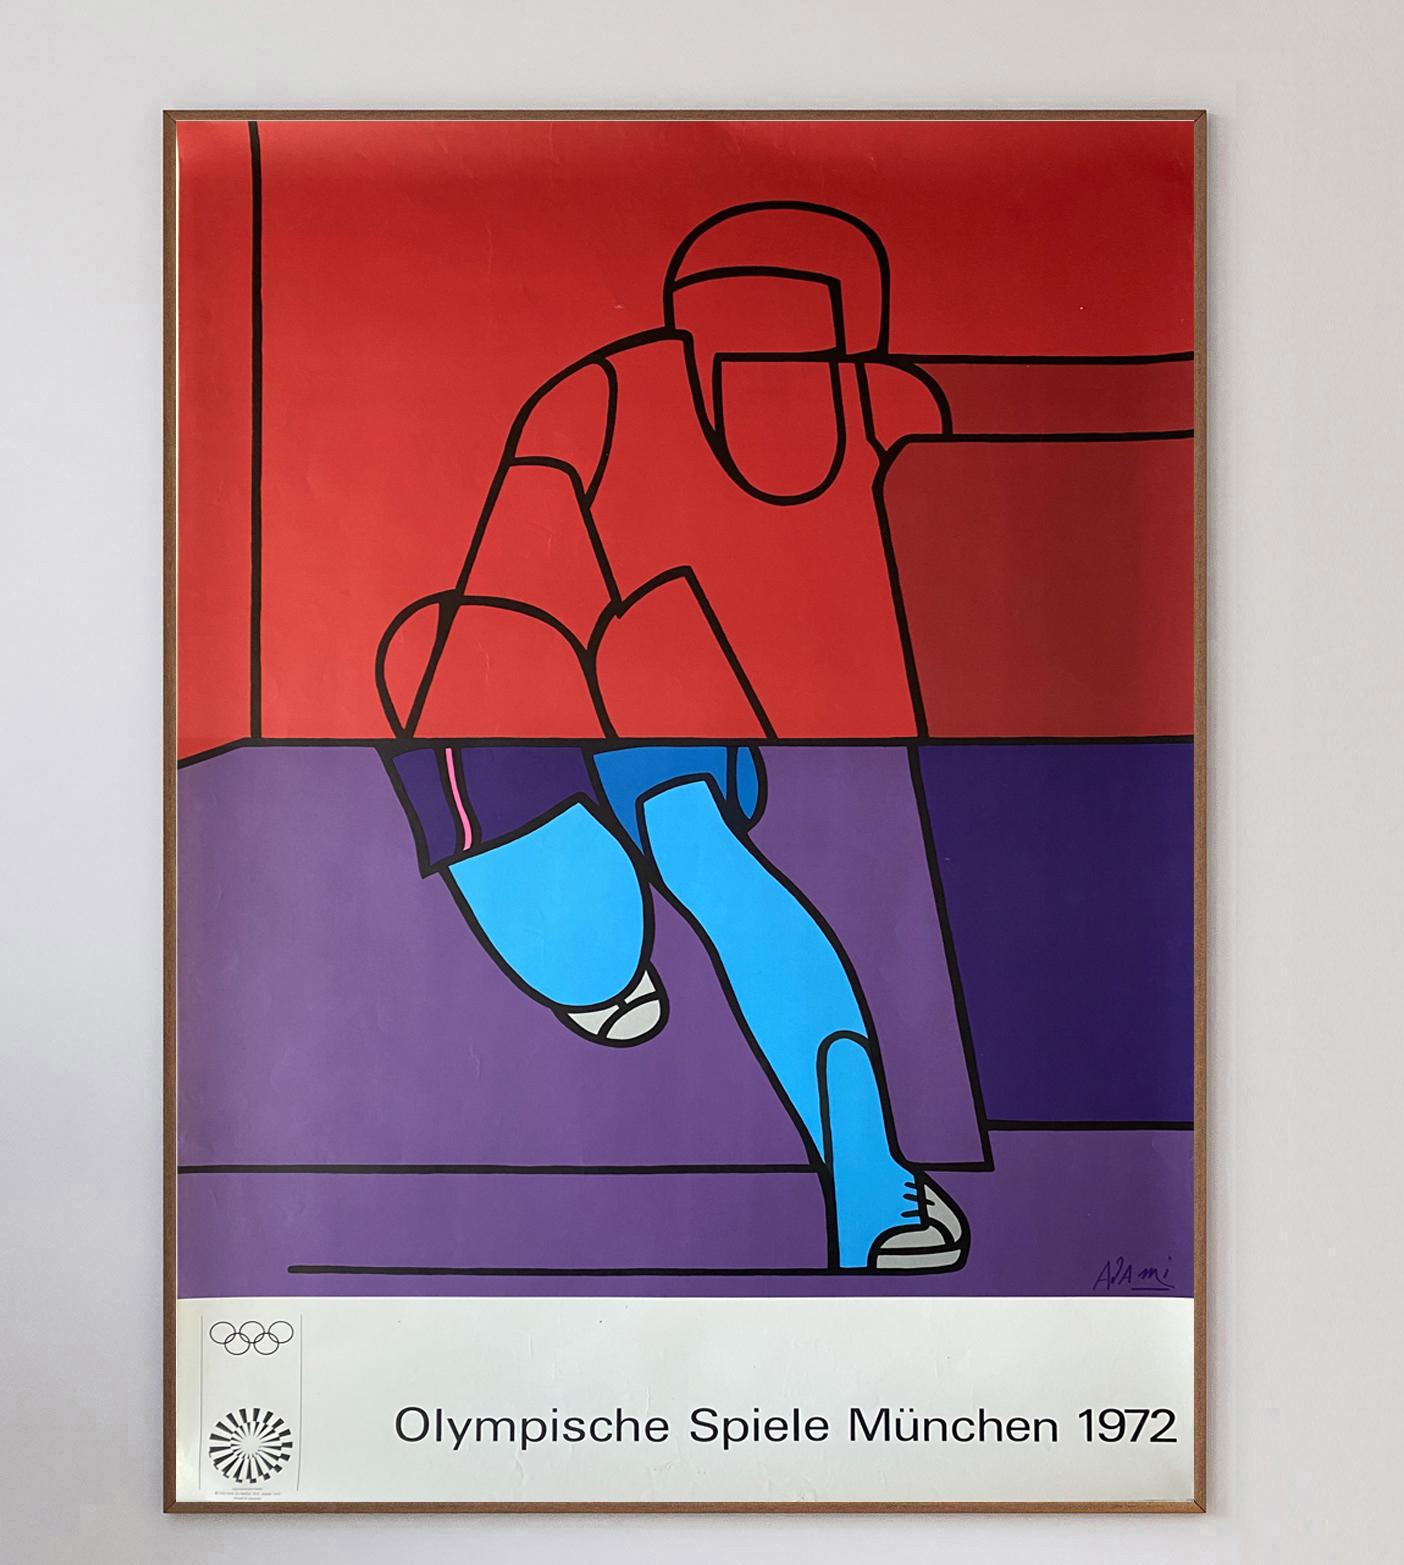 Italian painter Valerio Adami was one of 29 artists commissioned to produce posters for the 1972 Munich Olympic Games. In the run-up to the 1972 Games, the Organising Committee decided to commission a series of Artist Posters to 